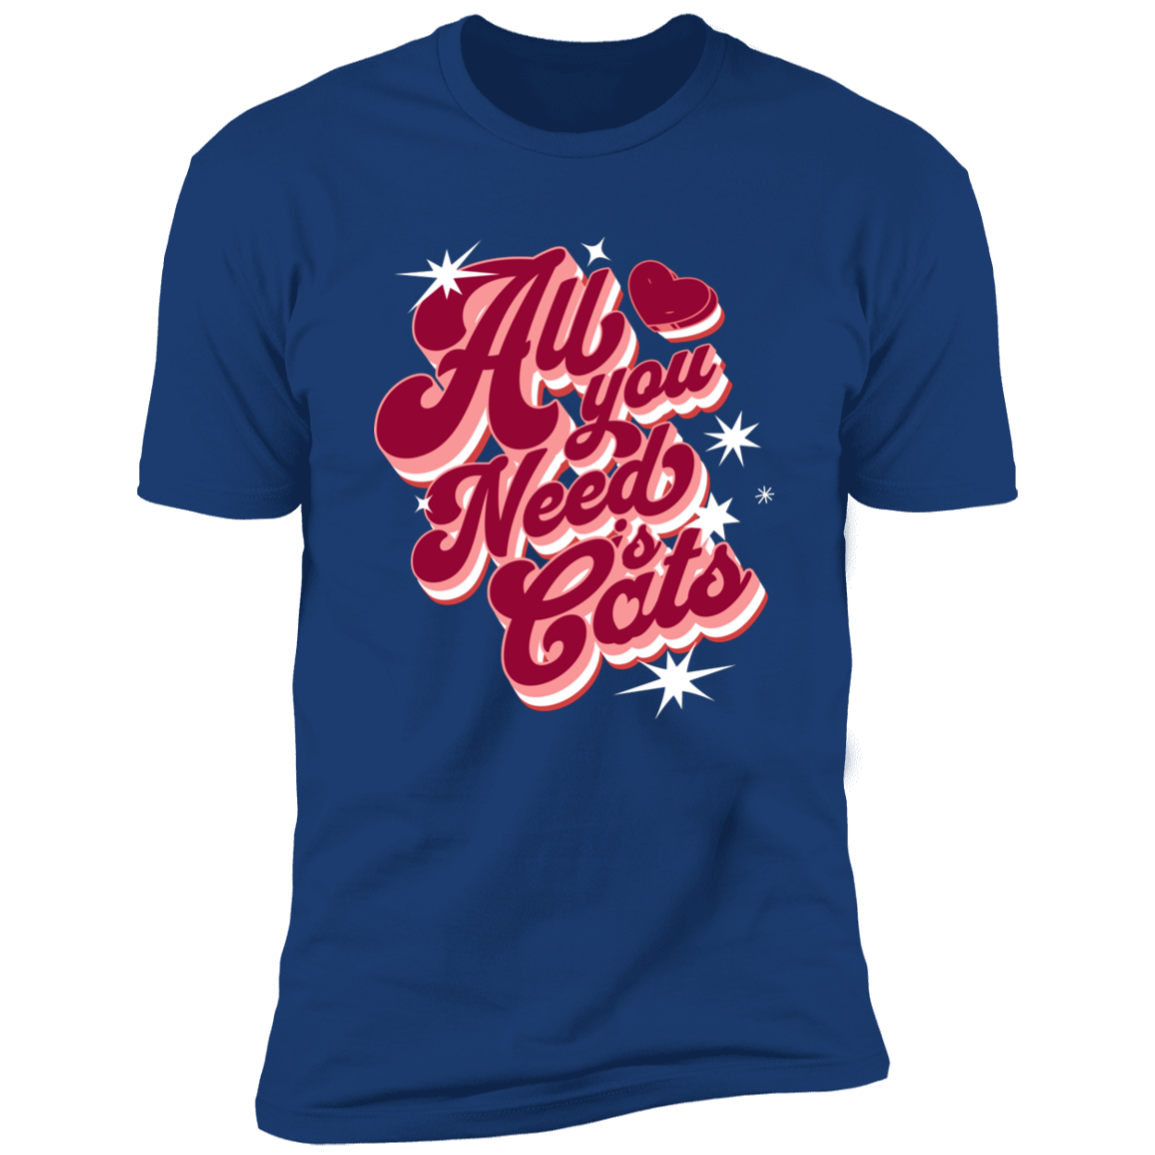 All I Need is Cats T-shirt, Cat Shirt for humans, in royal blue